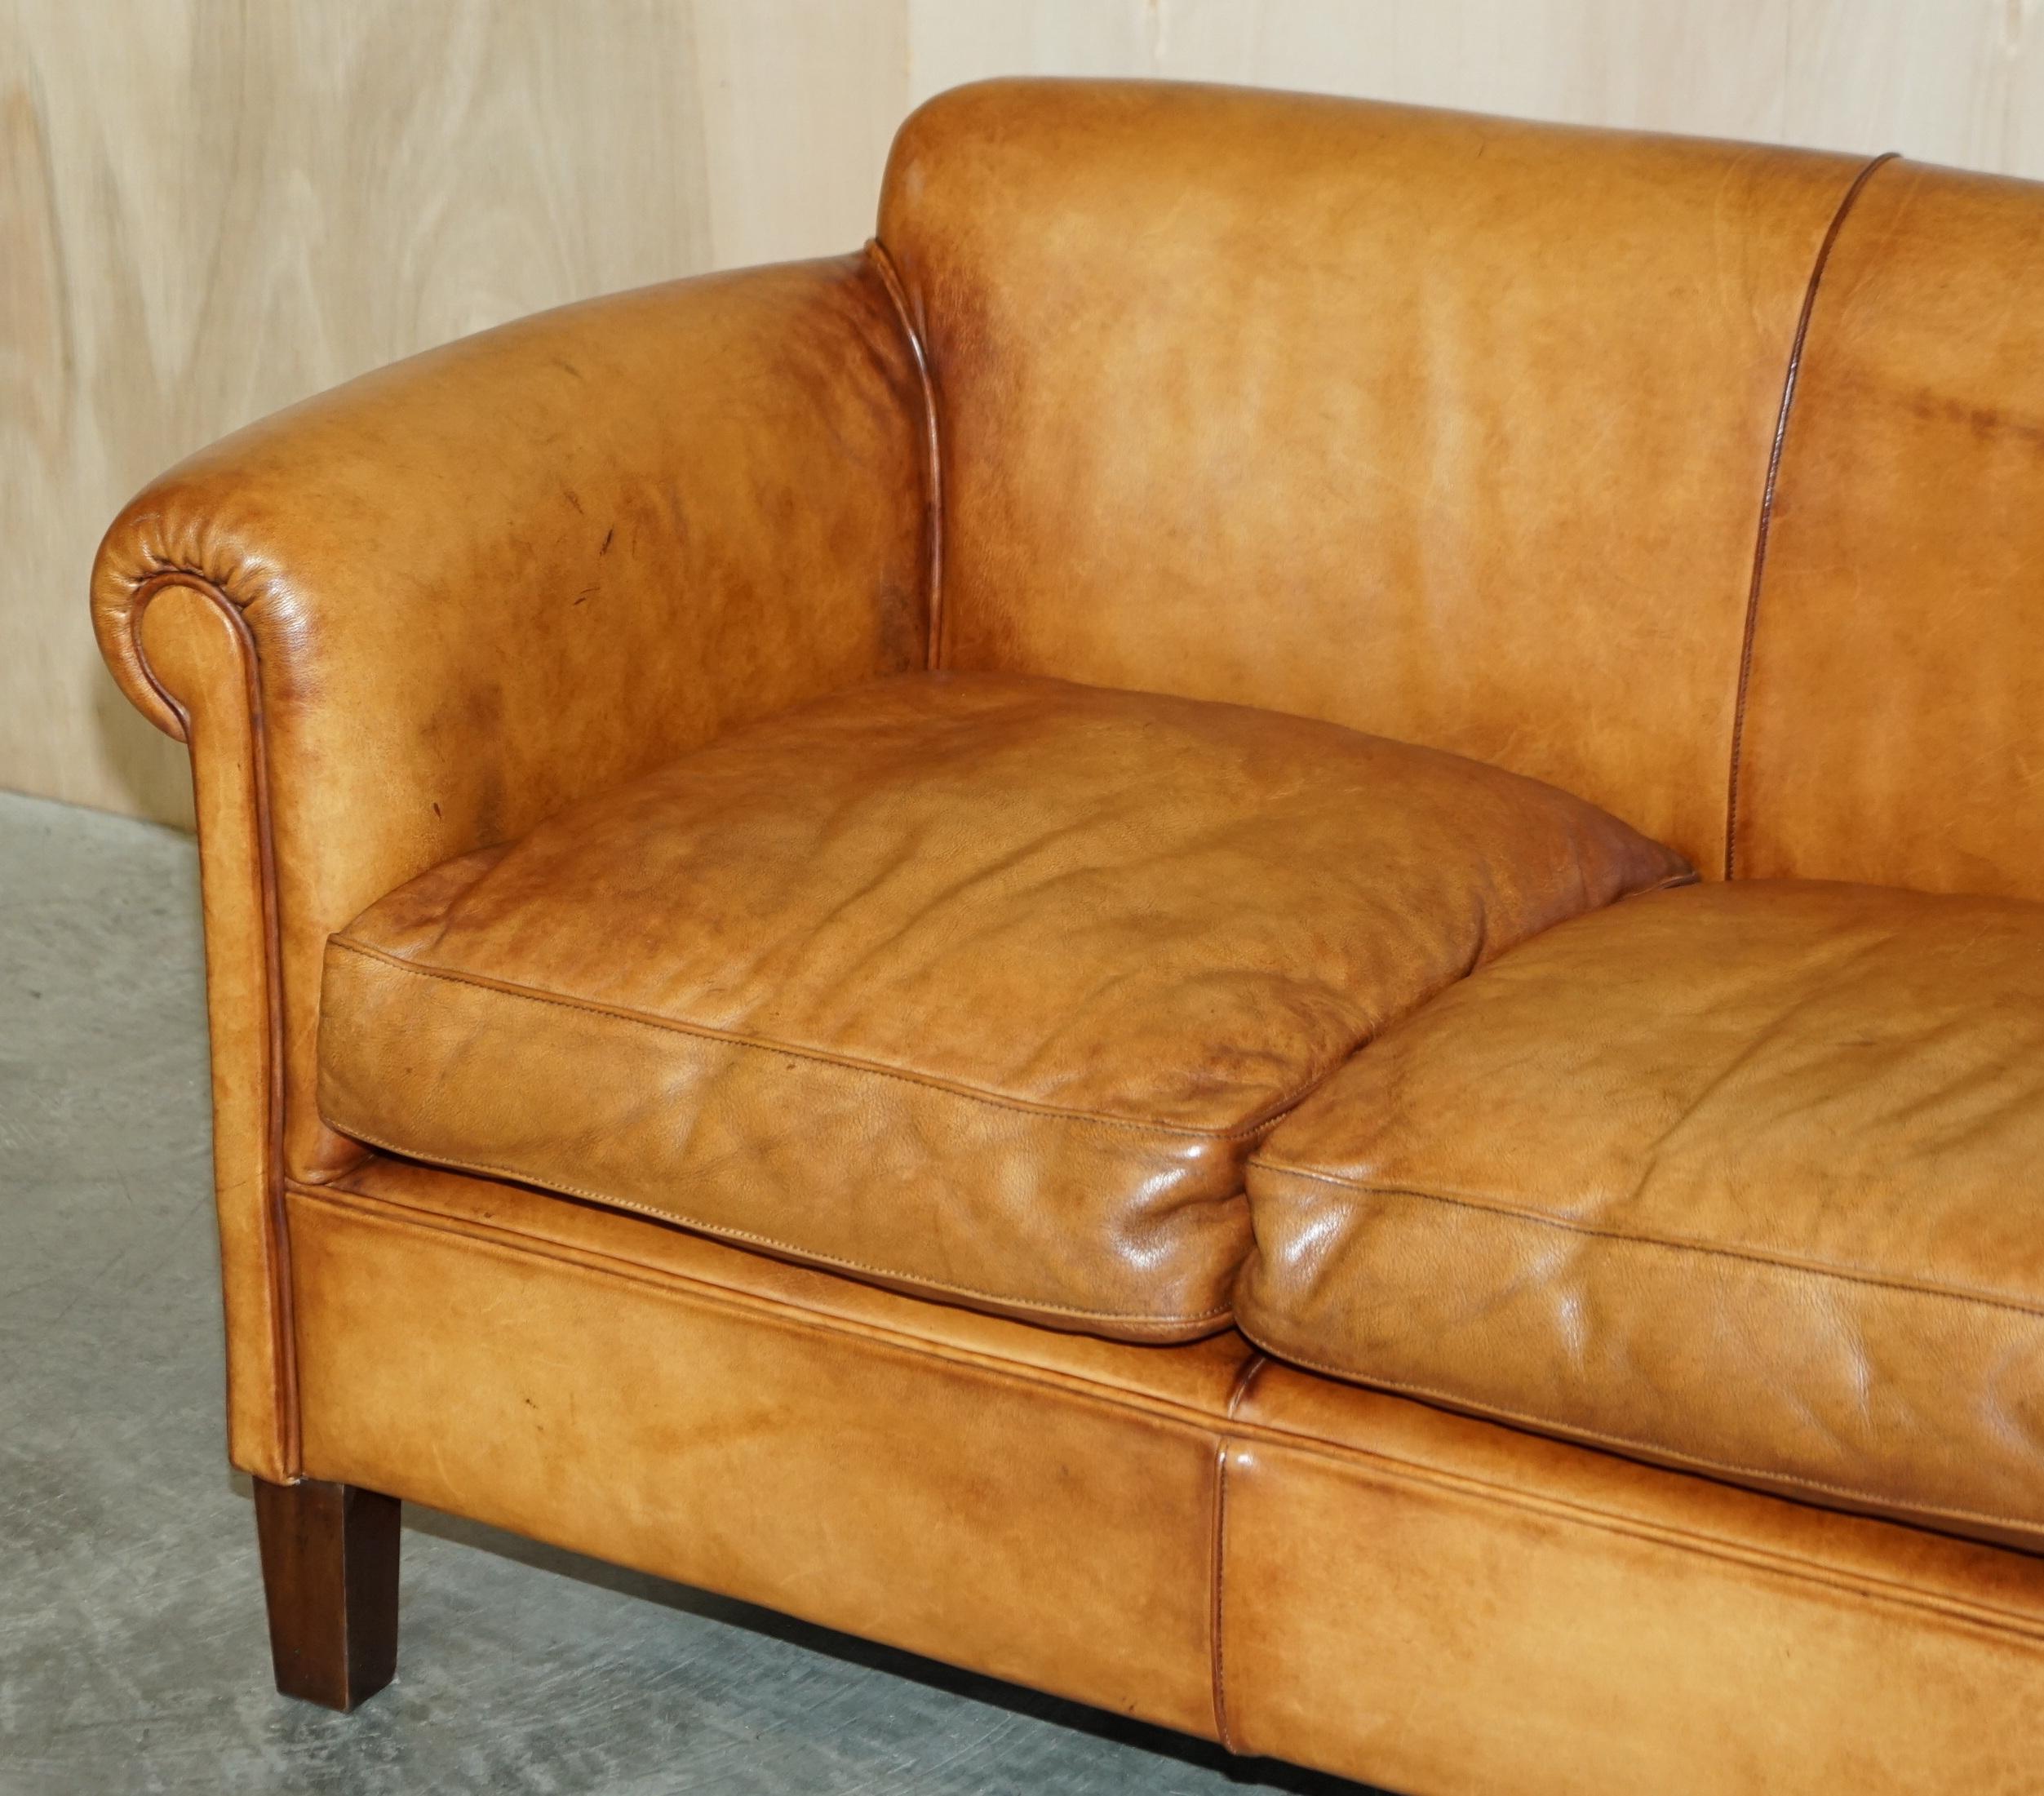 Rare John Lewis Camford Heritage Brown Leather Armchair & Two Seat Sofa Suite For Sale 3